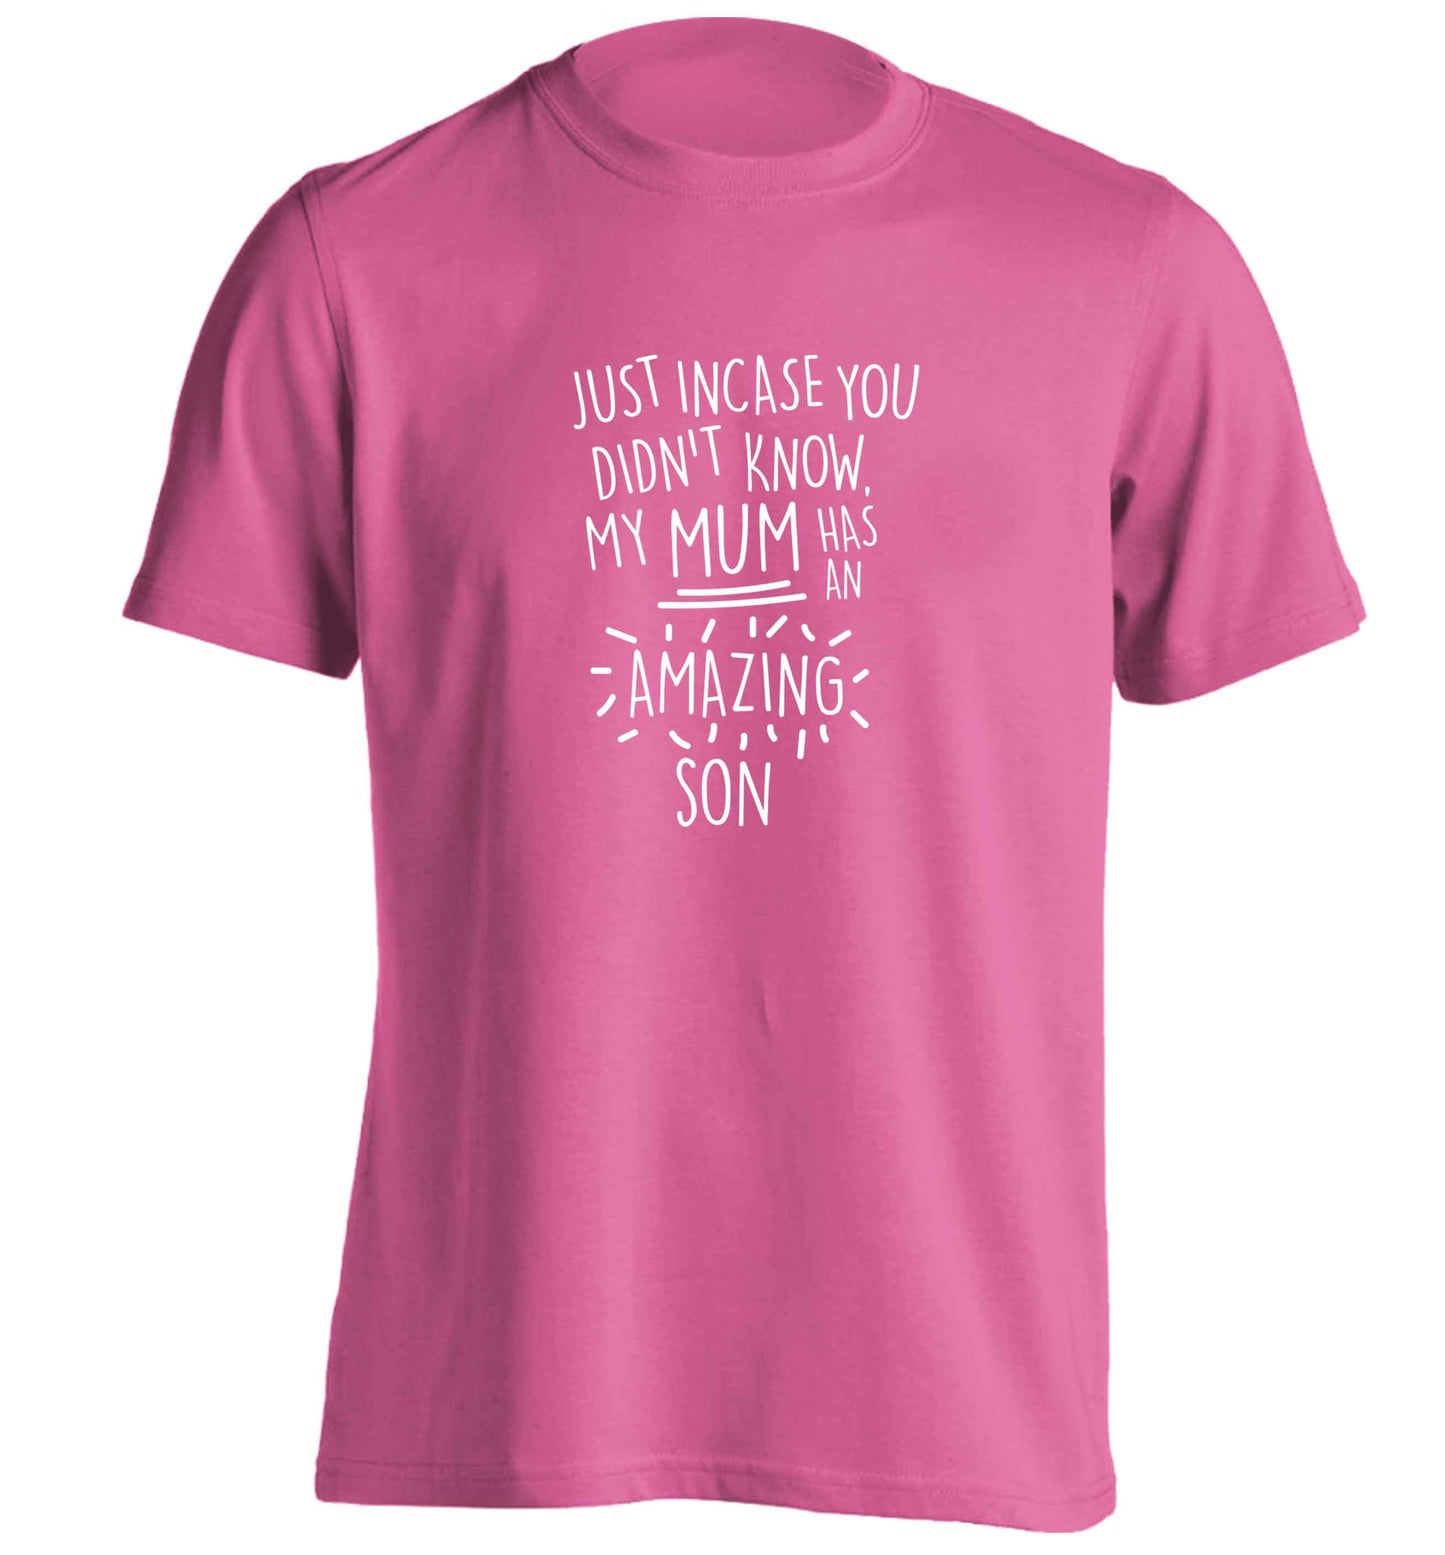 Just incase you didn't know my mum has an amazing son adults unisex pink Tshirt 2XL